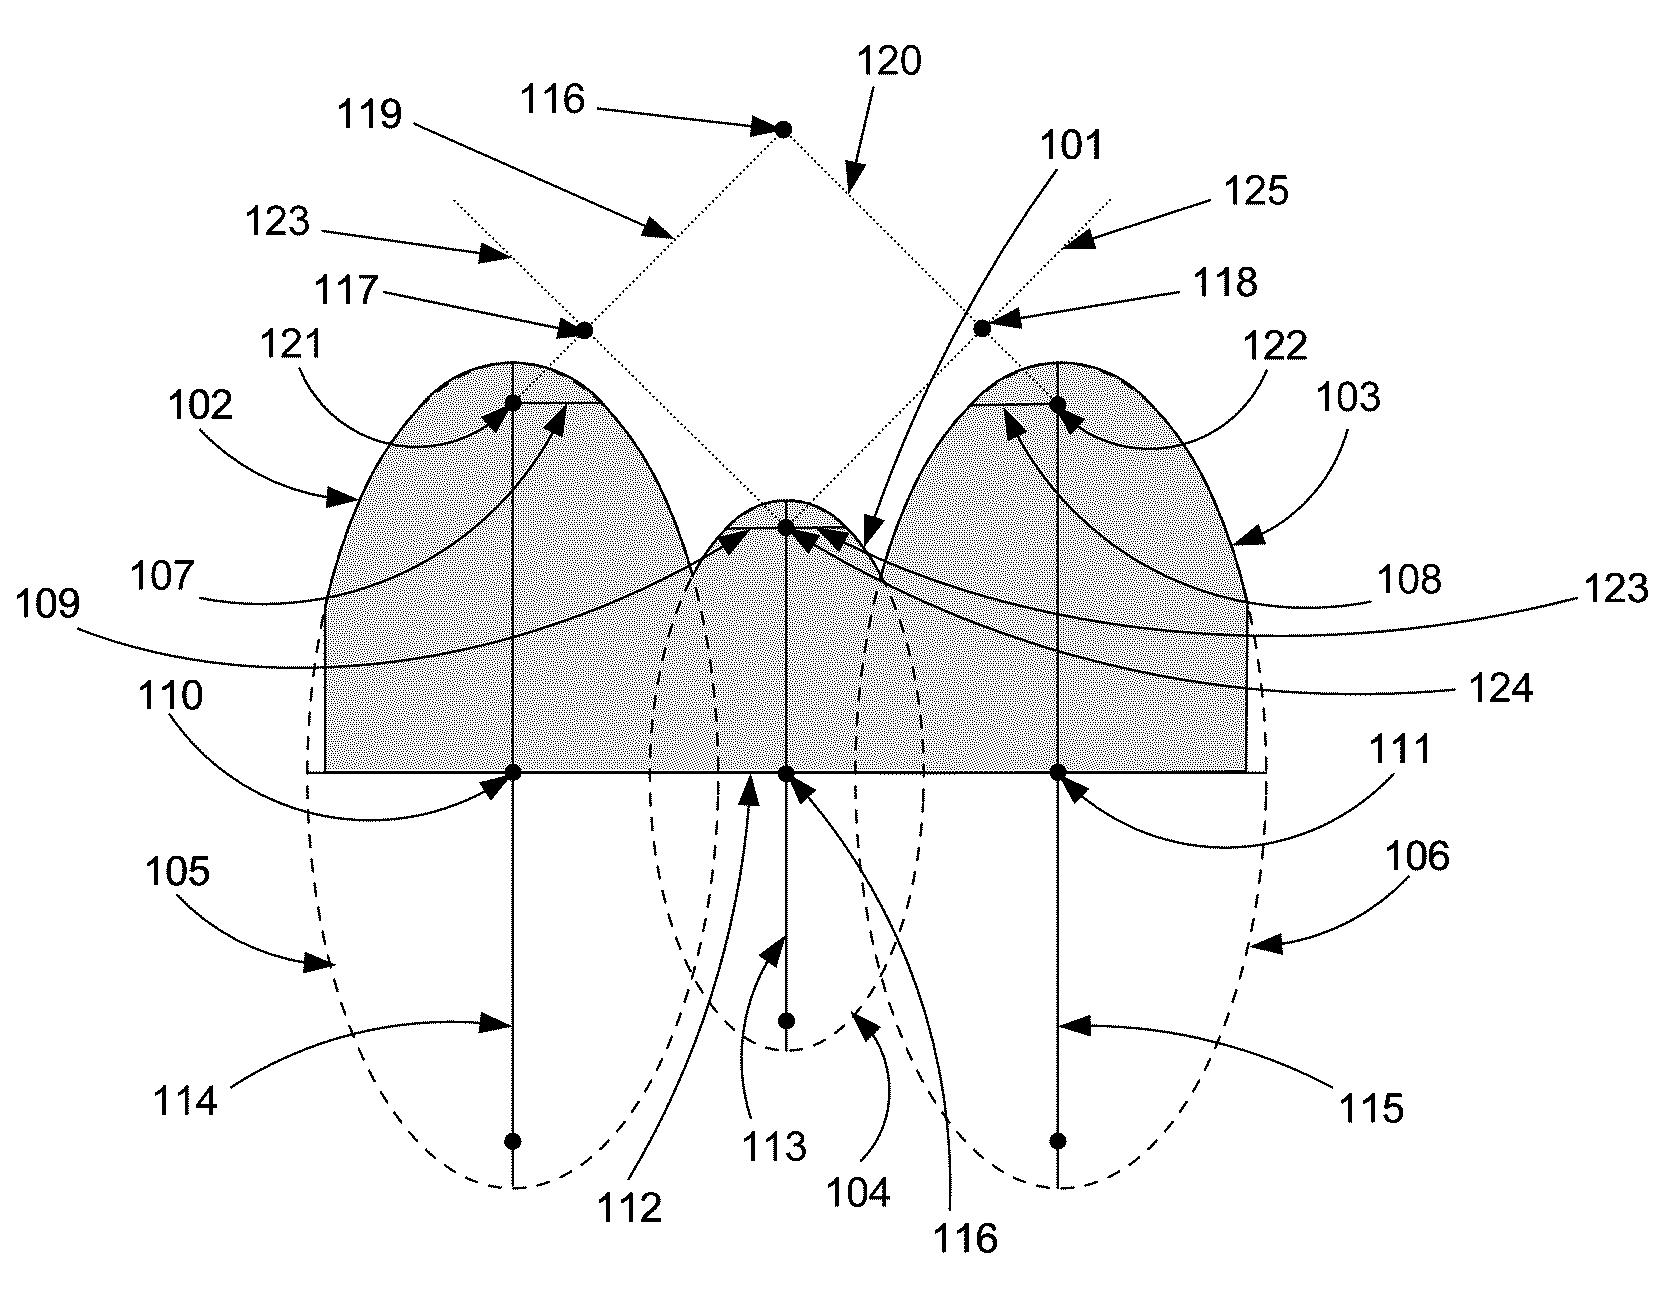 Lens for concentrating low frequency ultrasonic energy